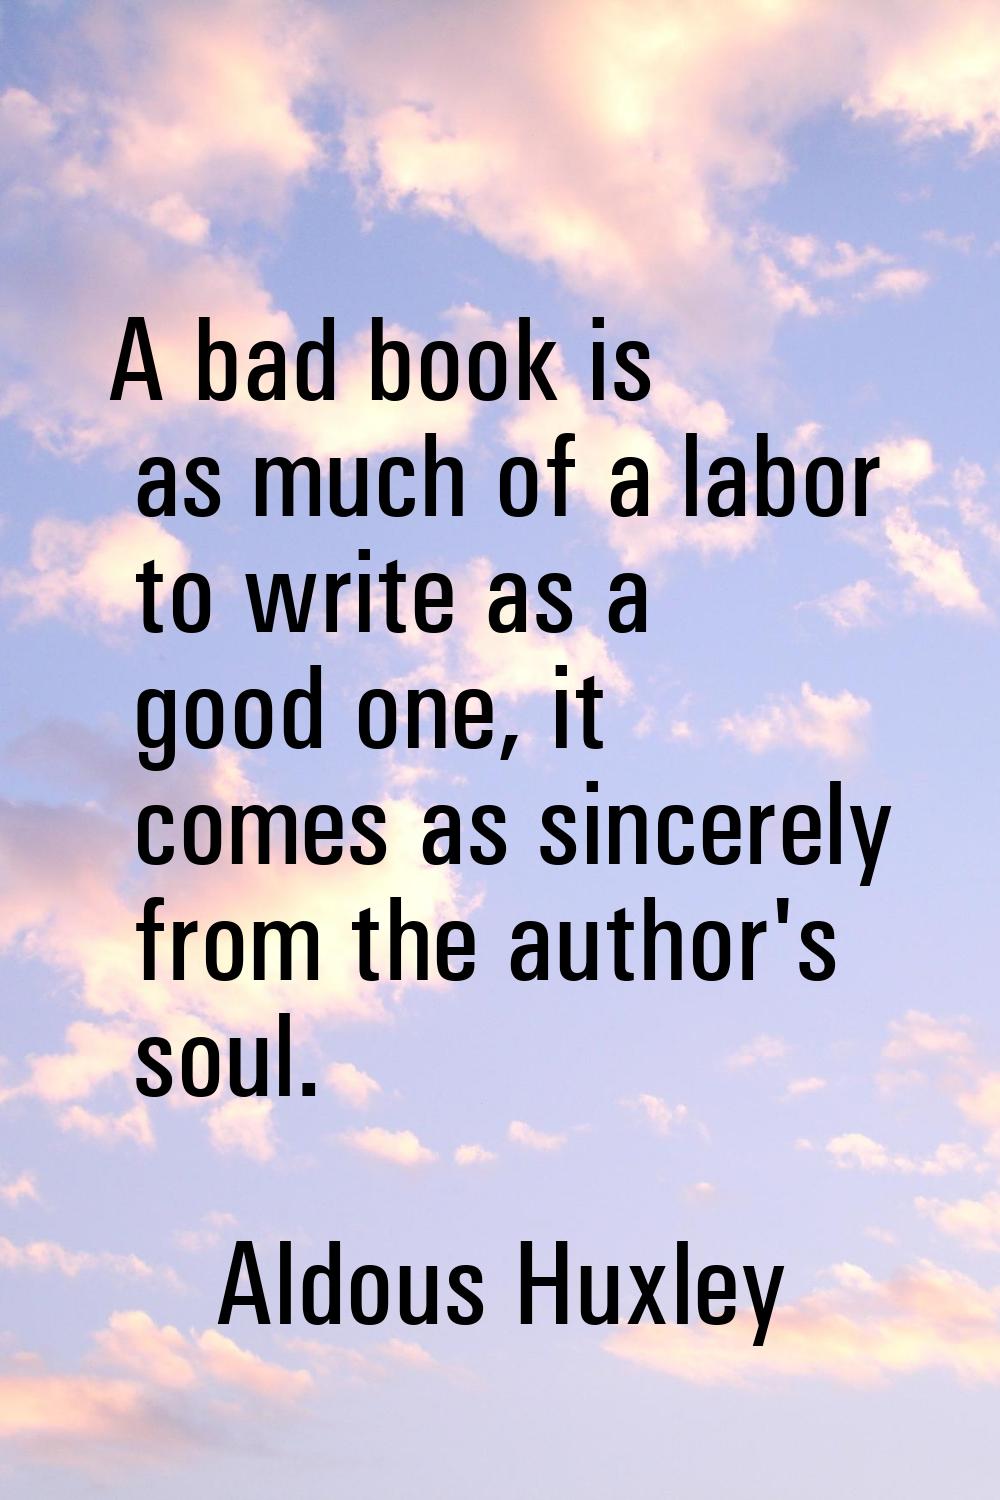 A bad book is as much of a labor to write as a good one, it comes as sincerely from the author's so